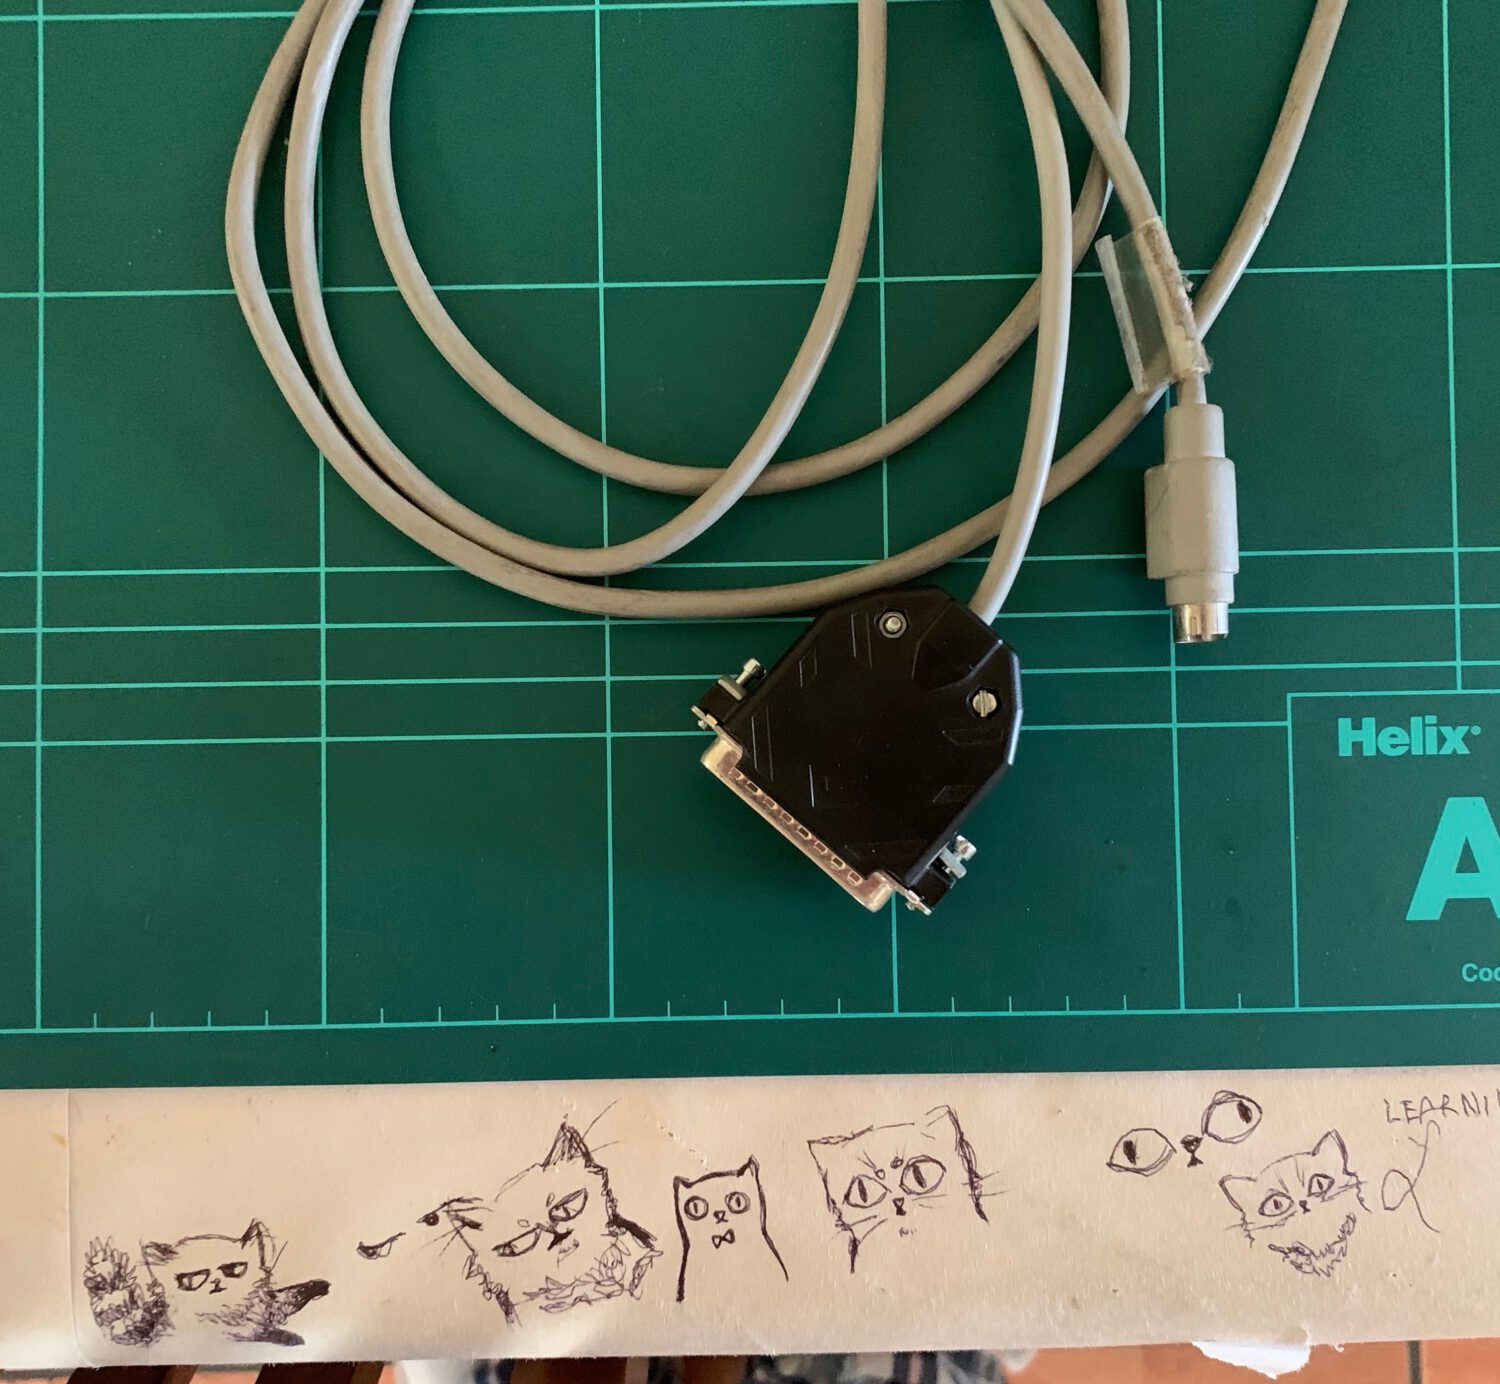 The PS/2 to DB25 serial cable my plotter came with